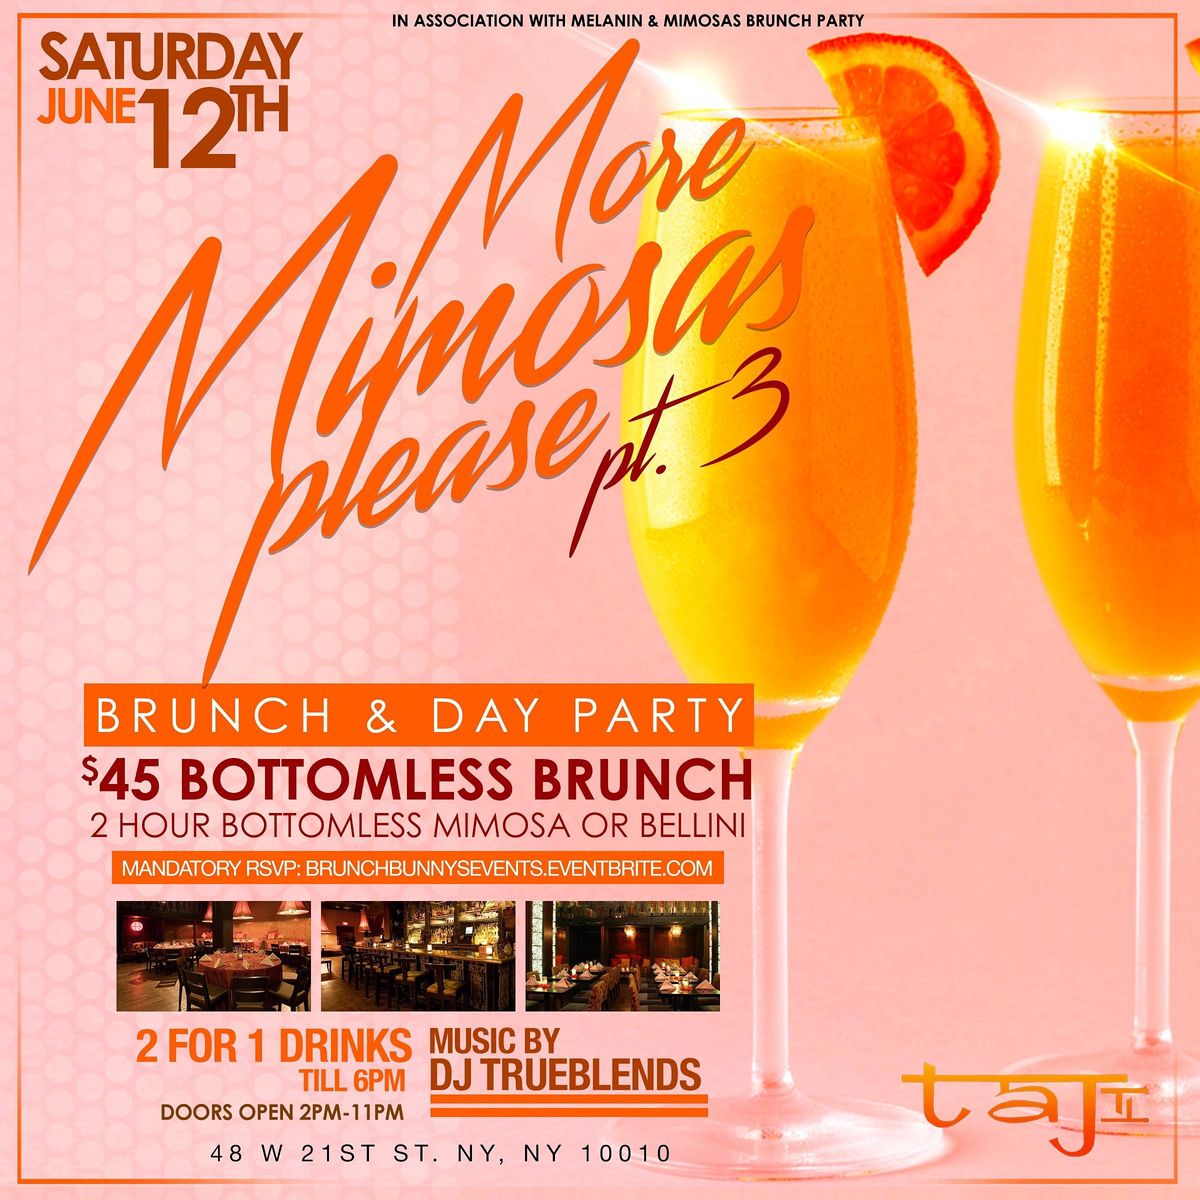 More Mimosas Please Part 3  (In Association With Melanin And Mimosas)